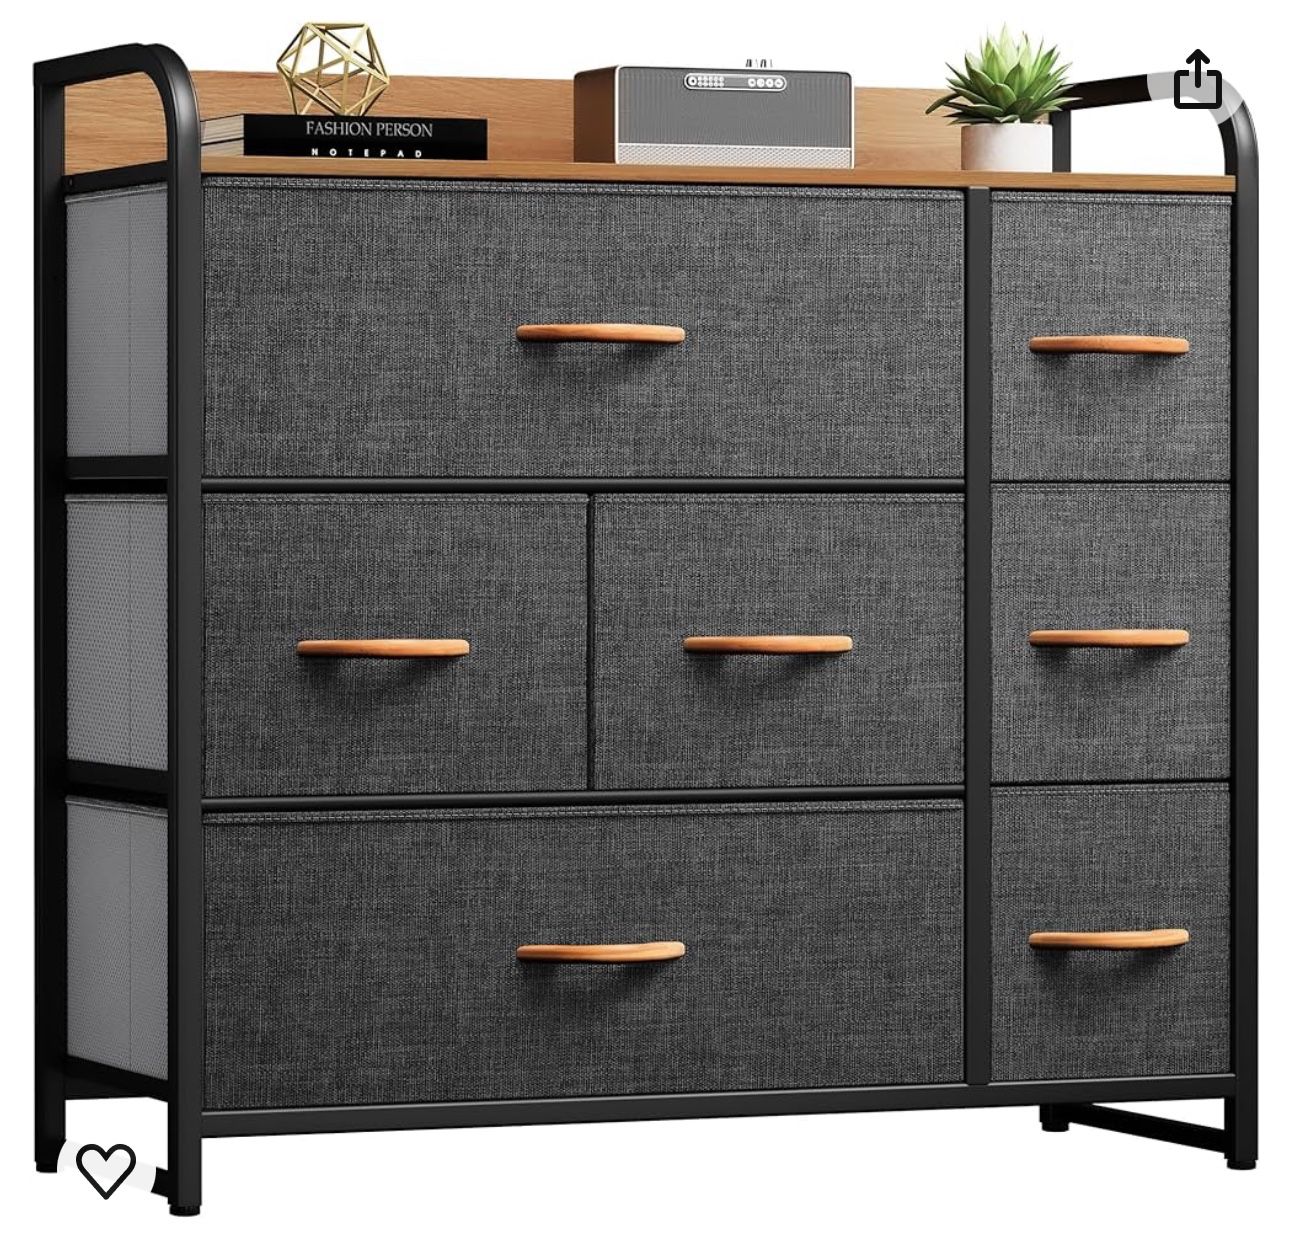 Fabric Dresser with 7 Drawers, Black Dresser & Chest of Drawers, Storage Tower with Large Capacity